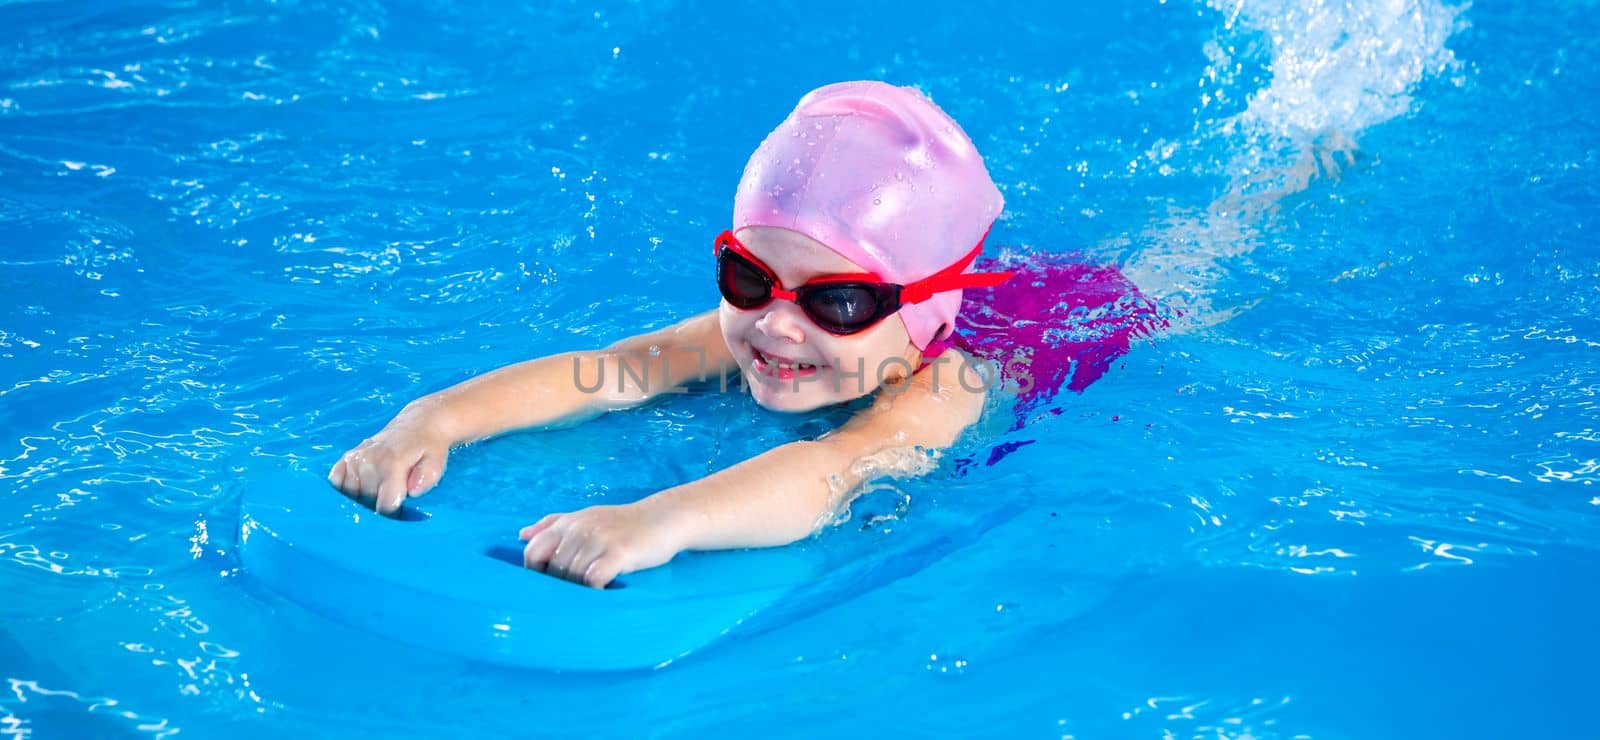 Panorama of Smiling little girl learning to swim in pool with flutterboard during swimming class by Mariakray